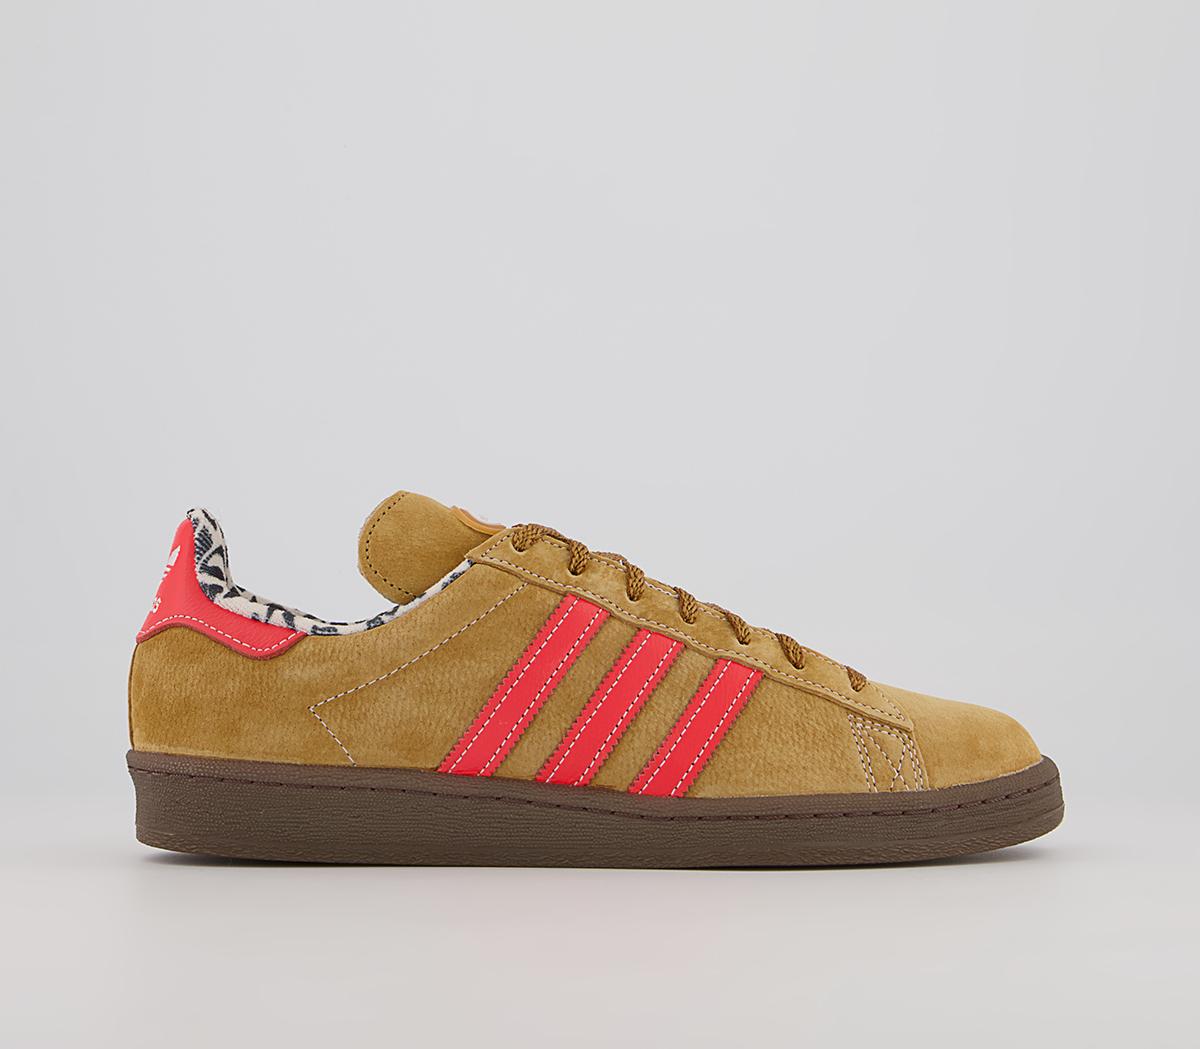 Formand national flag drikke adidas Consortium Campus 80 Xlarge Trainers Mesa Solar Red Gum - Women's  Trainers